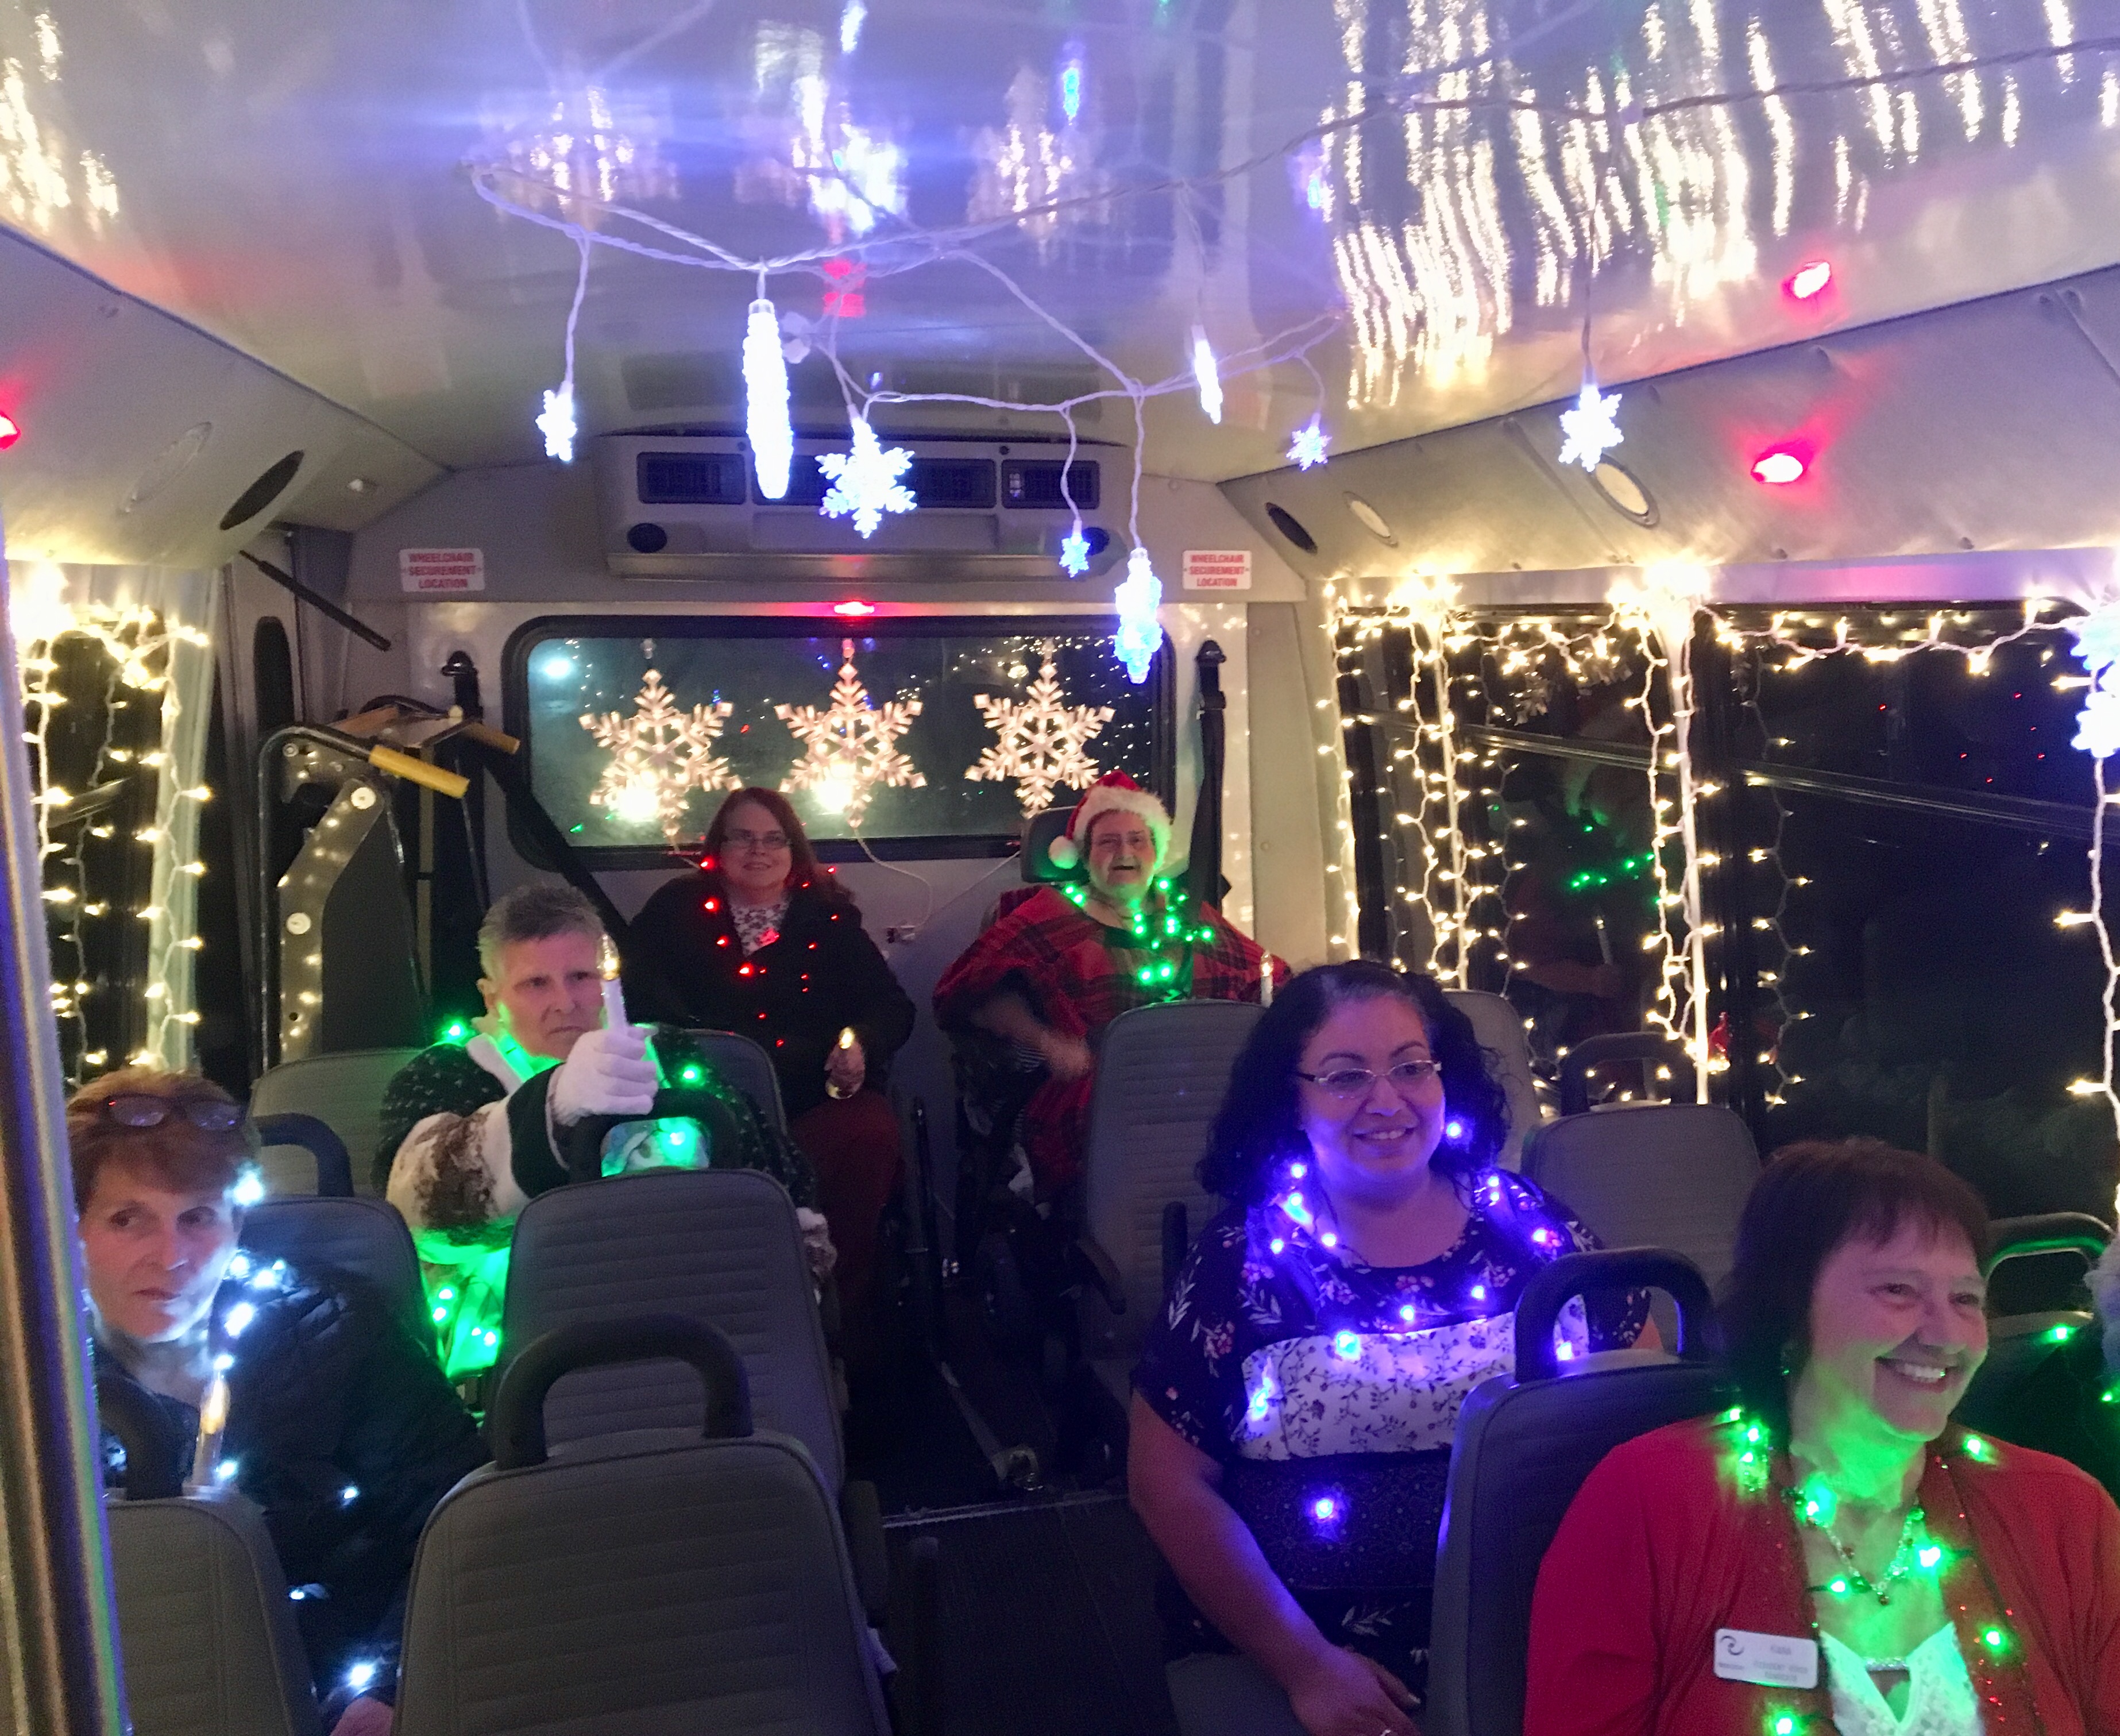 inside of bus decorated with lights